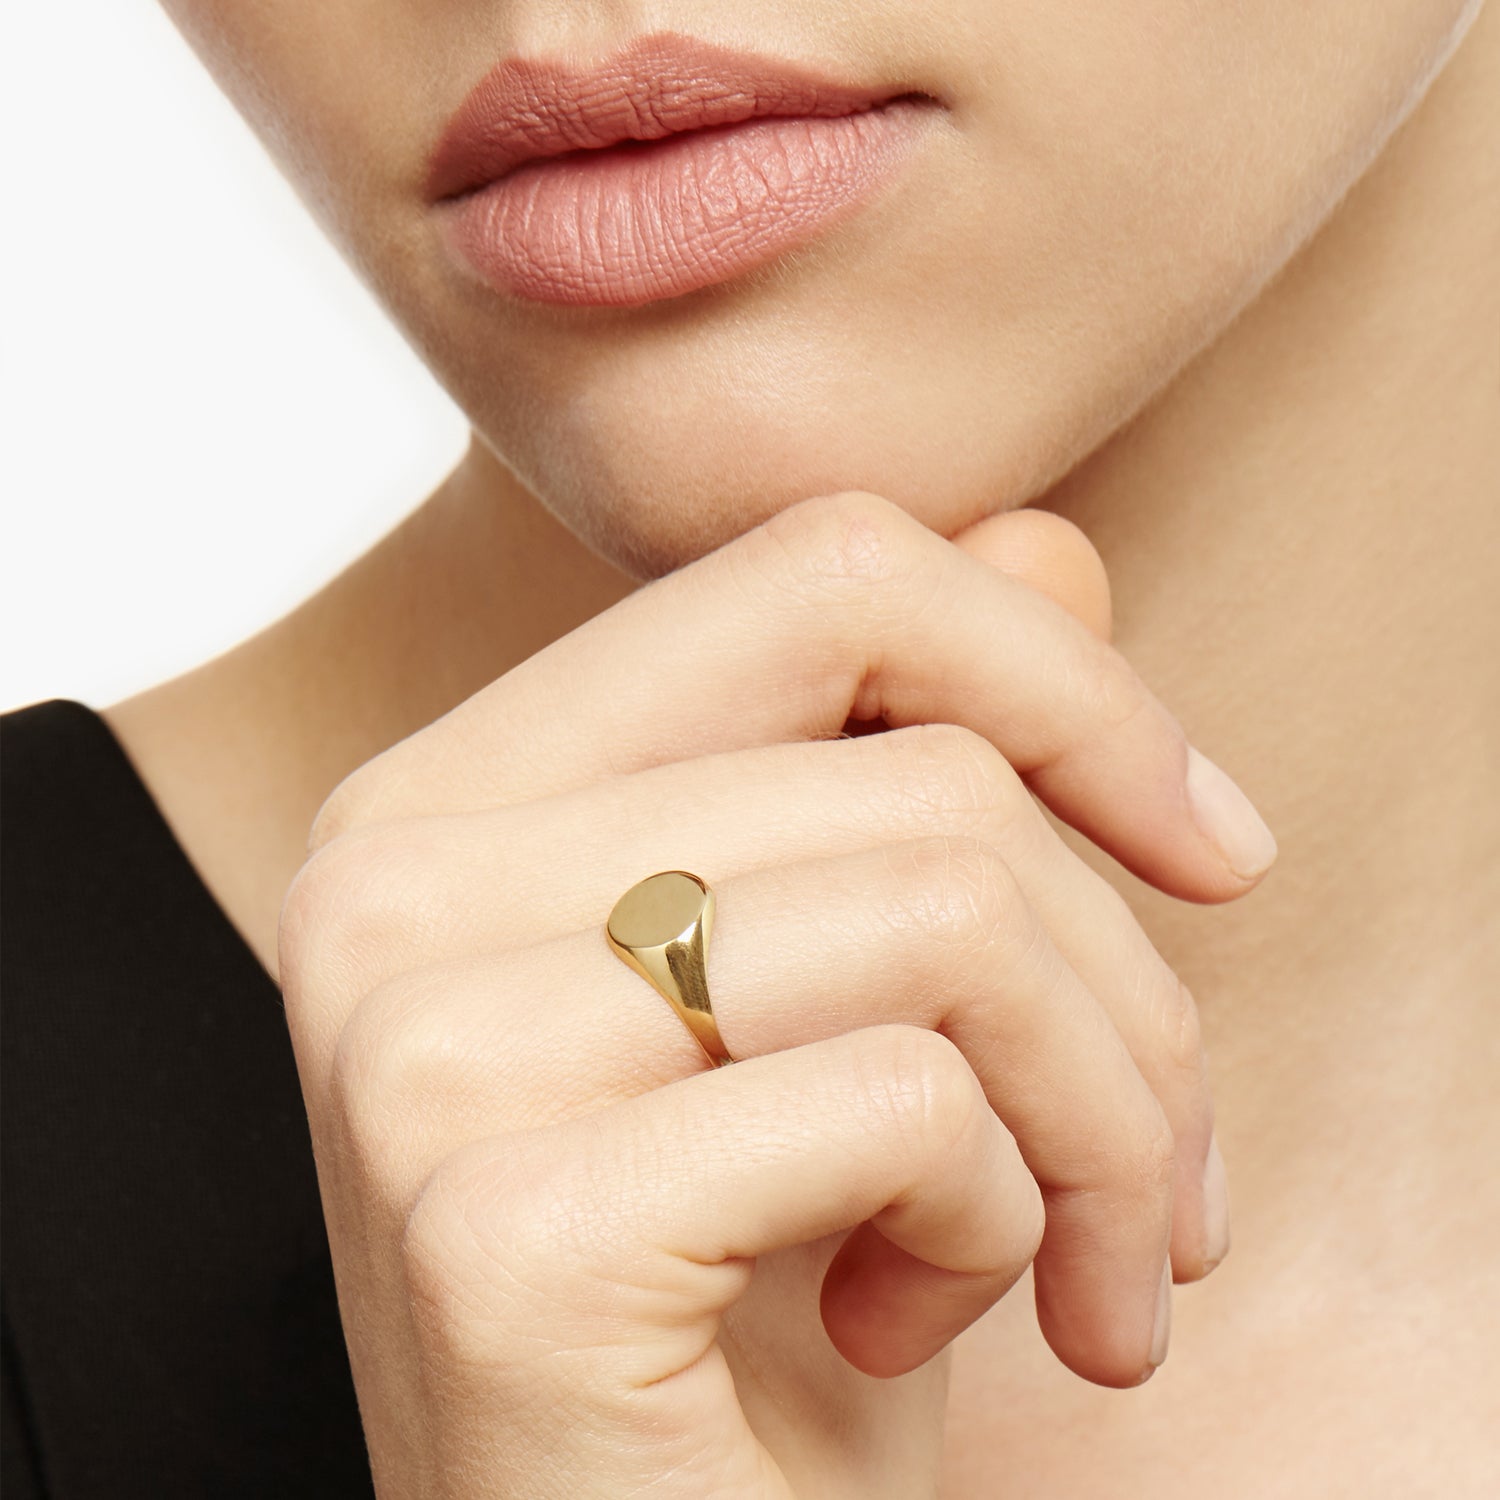 Double Initial Edwardian Round Signet Ring with diamond - 9k Yellow Gold - Myia Bonner Jewellery